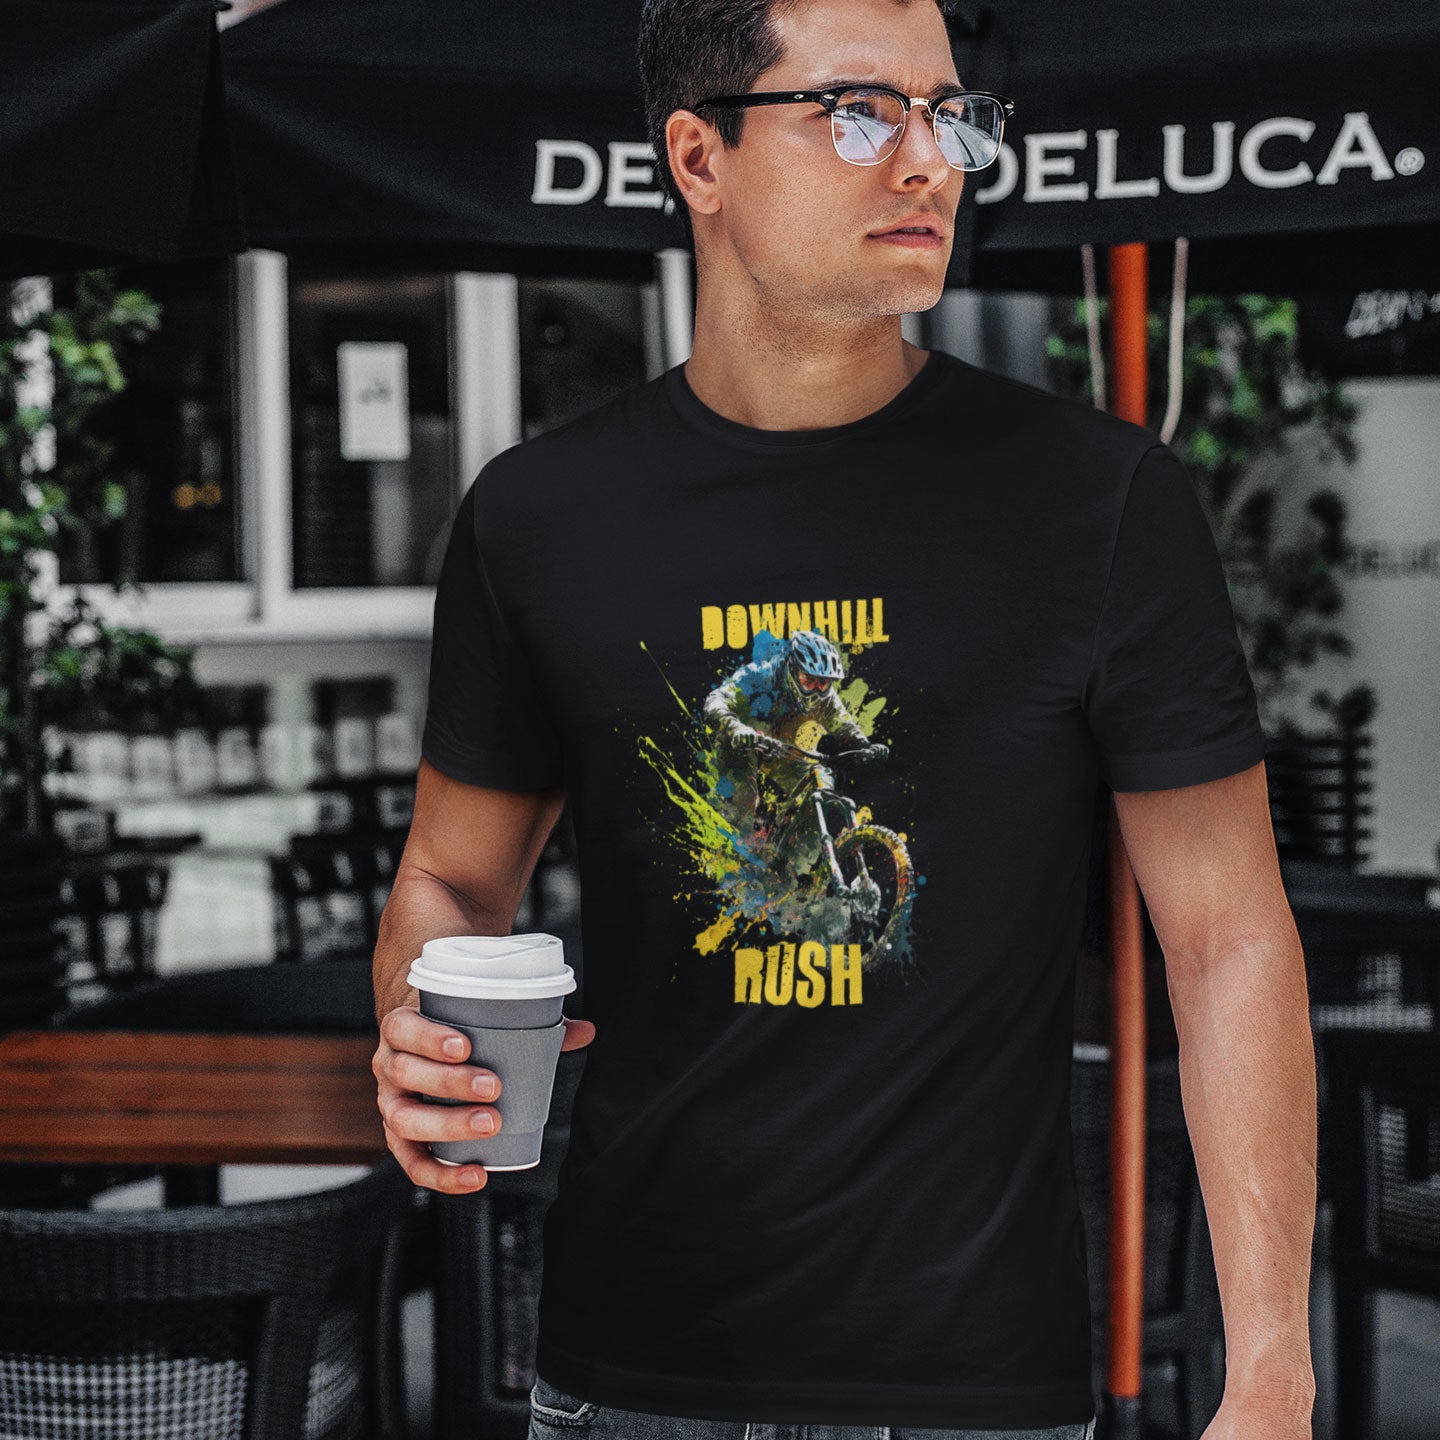 Guy drinking coffee wearing a black t-shirt with a downhill mountain biker print and the caption Downhill Rush